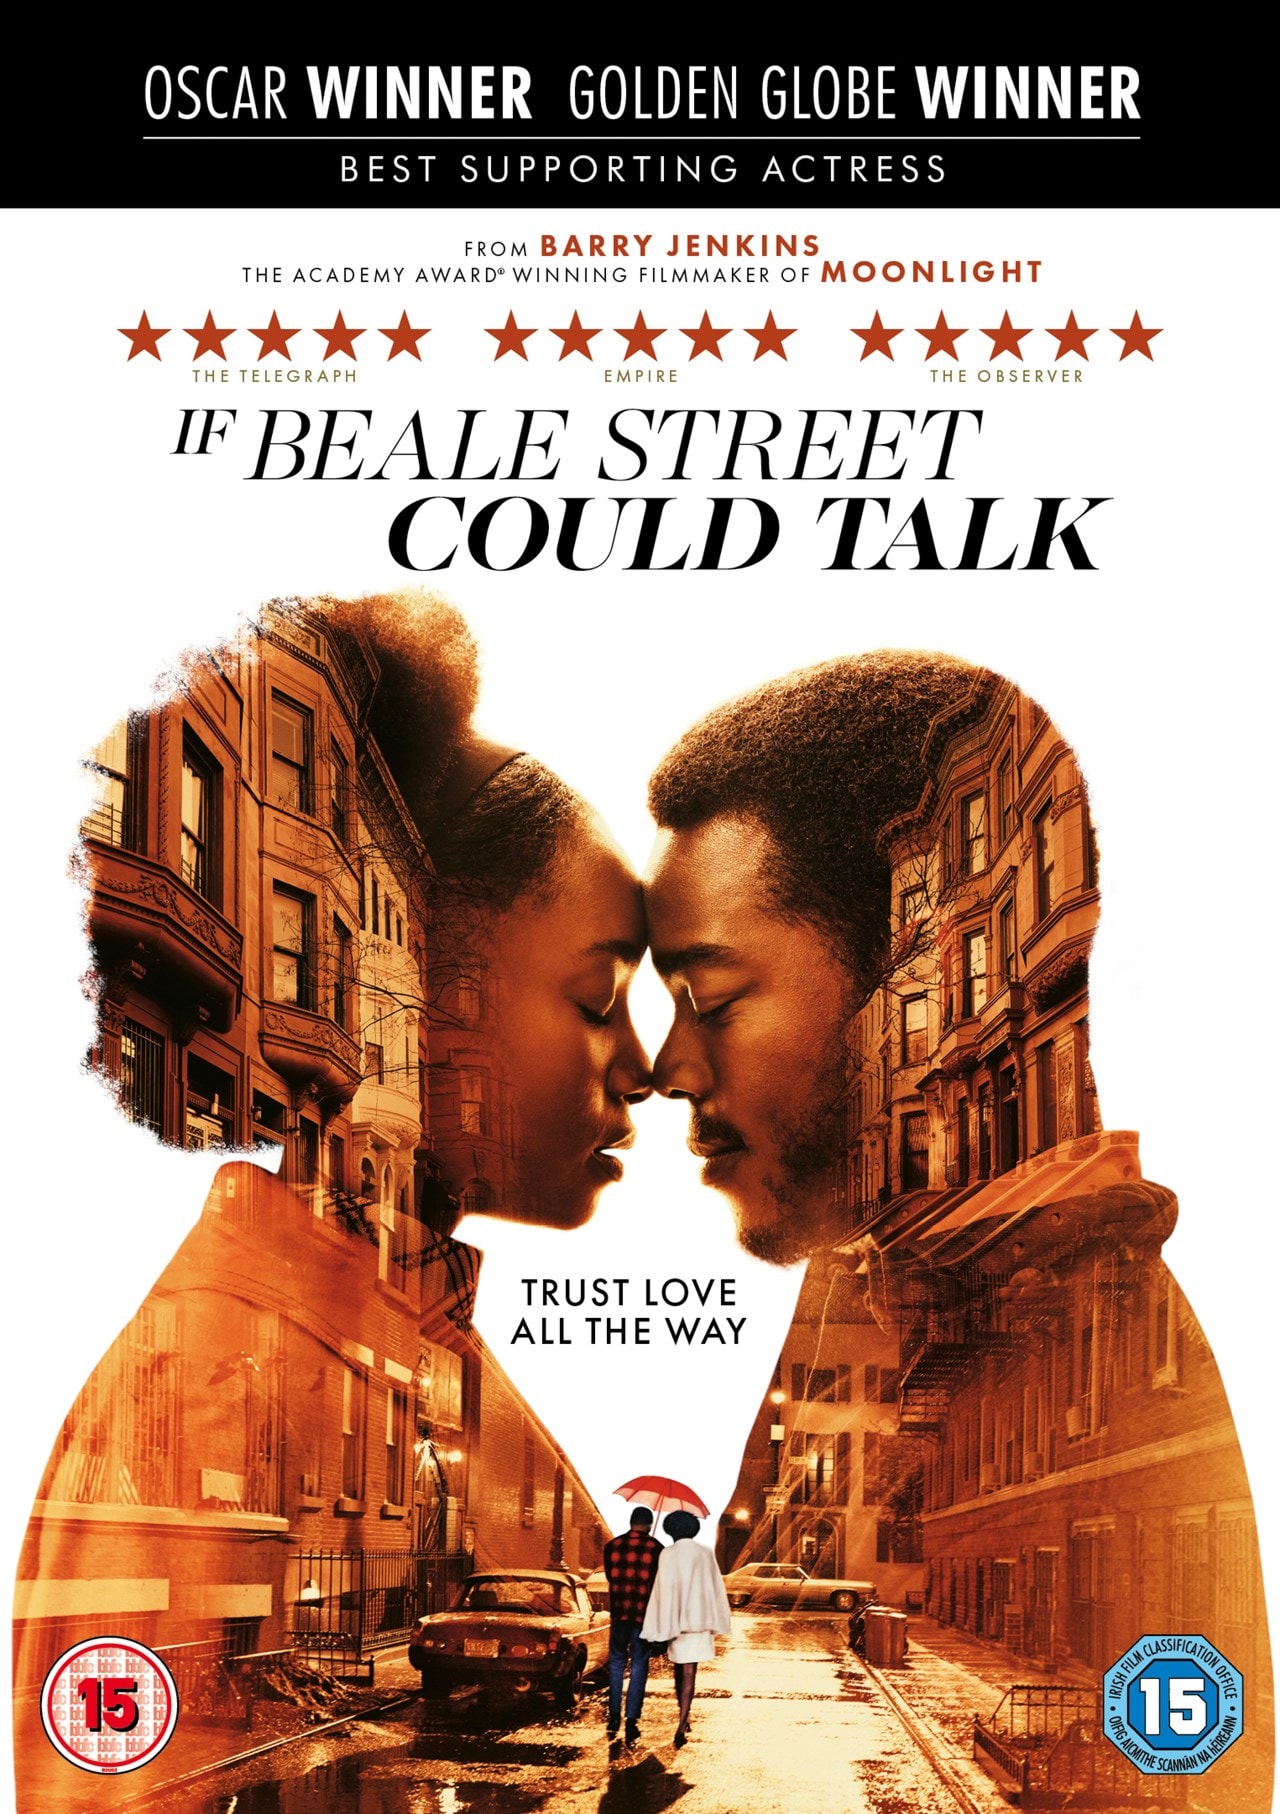 thesis statement for if beale street could talk